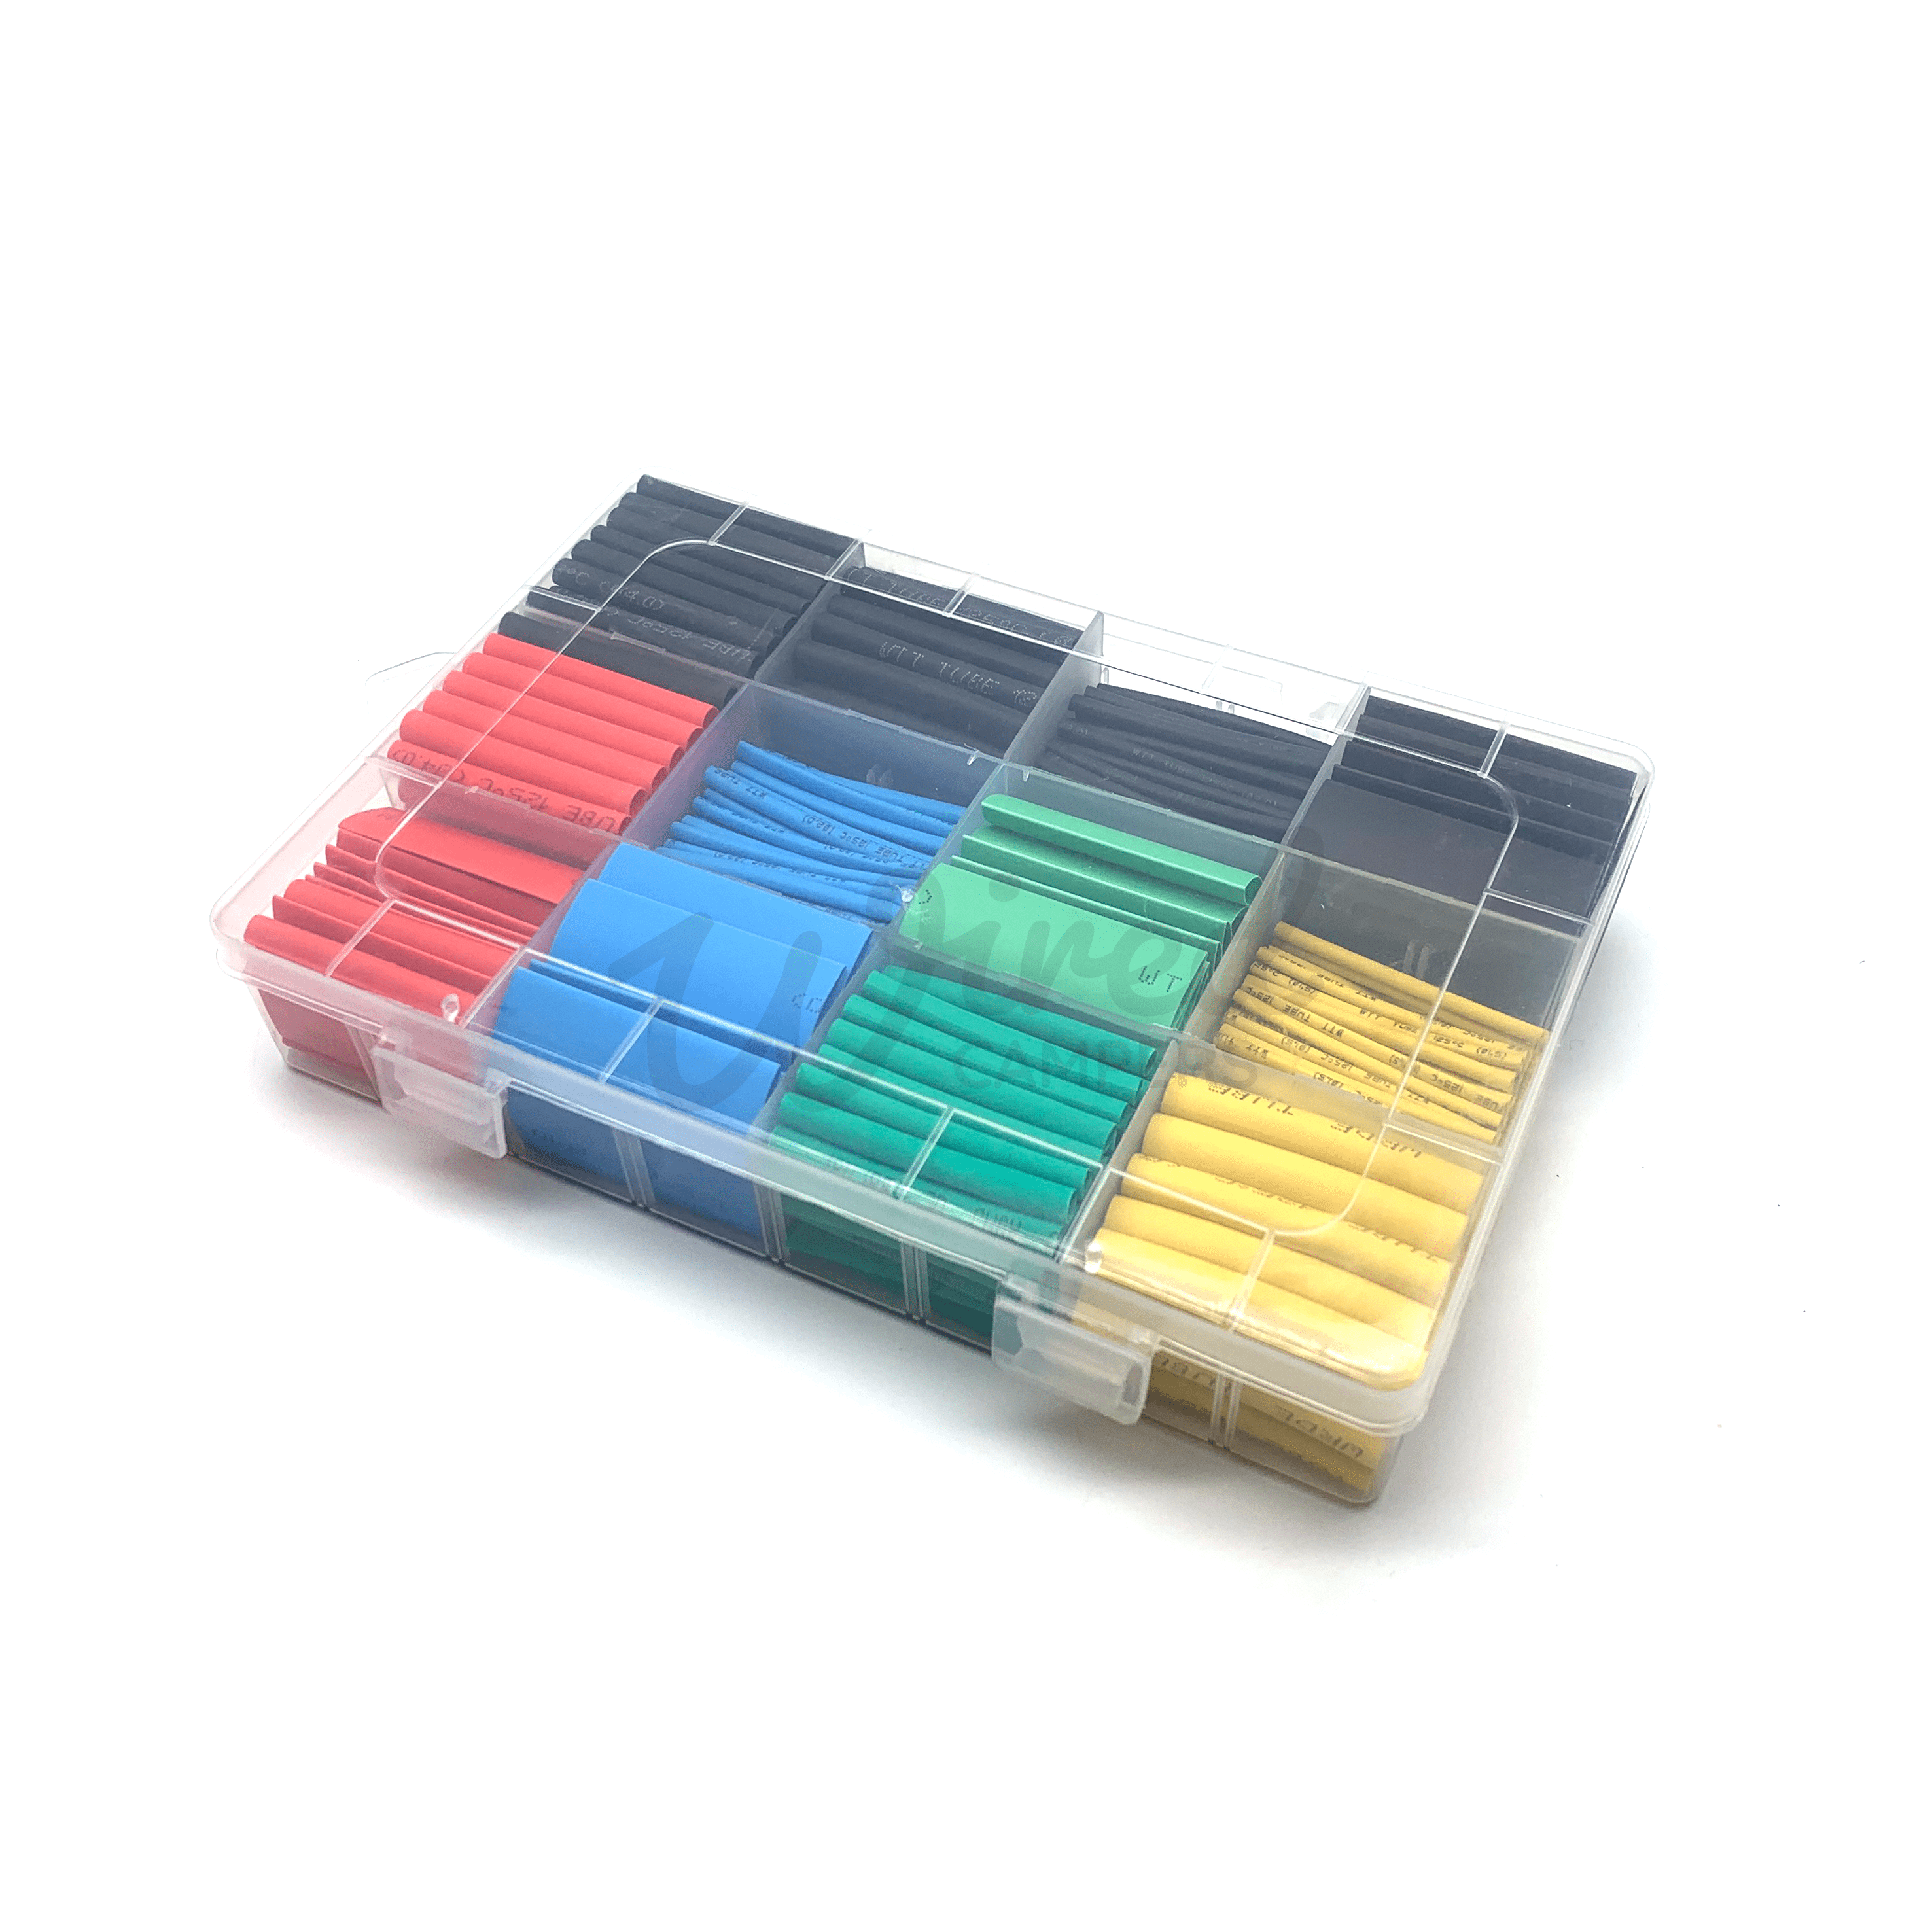 Wired Campers Limited Box Of 530 Pieces Assorted Colour Cable Wire Heat Shrink Tube Sleeve 2:1